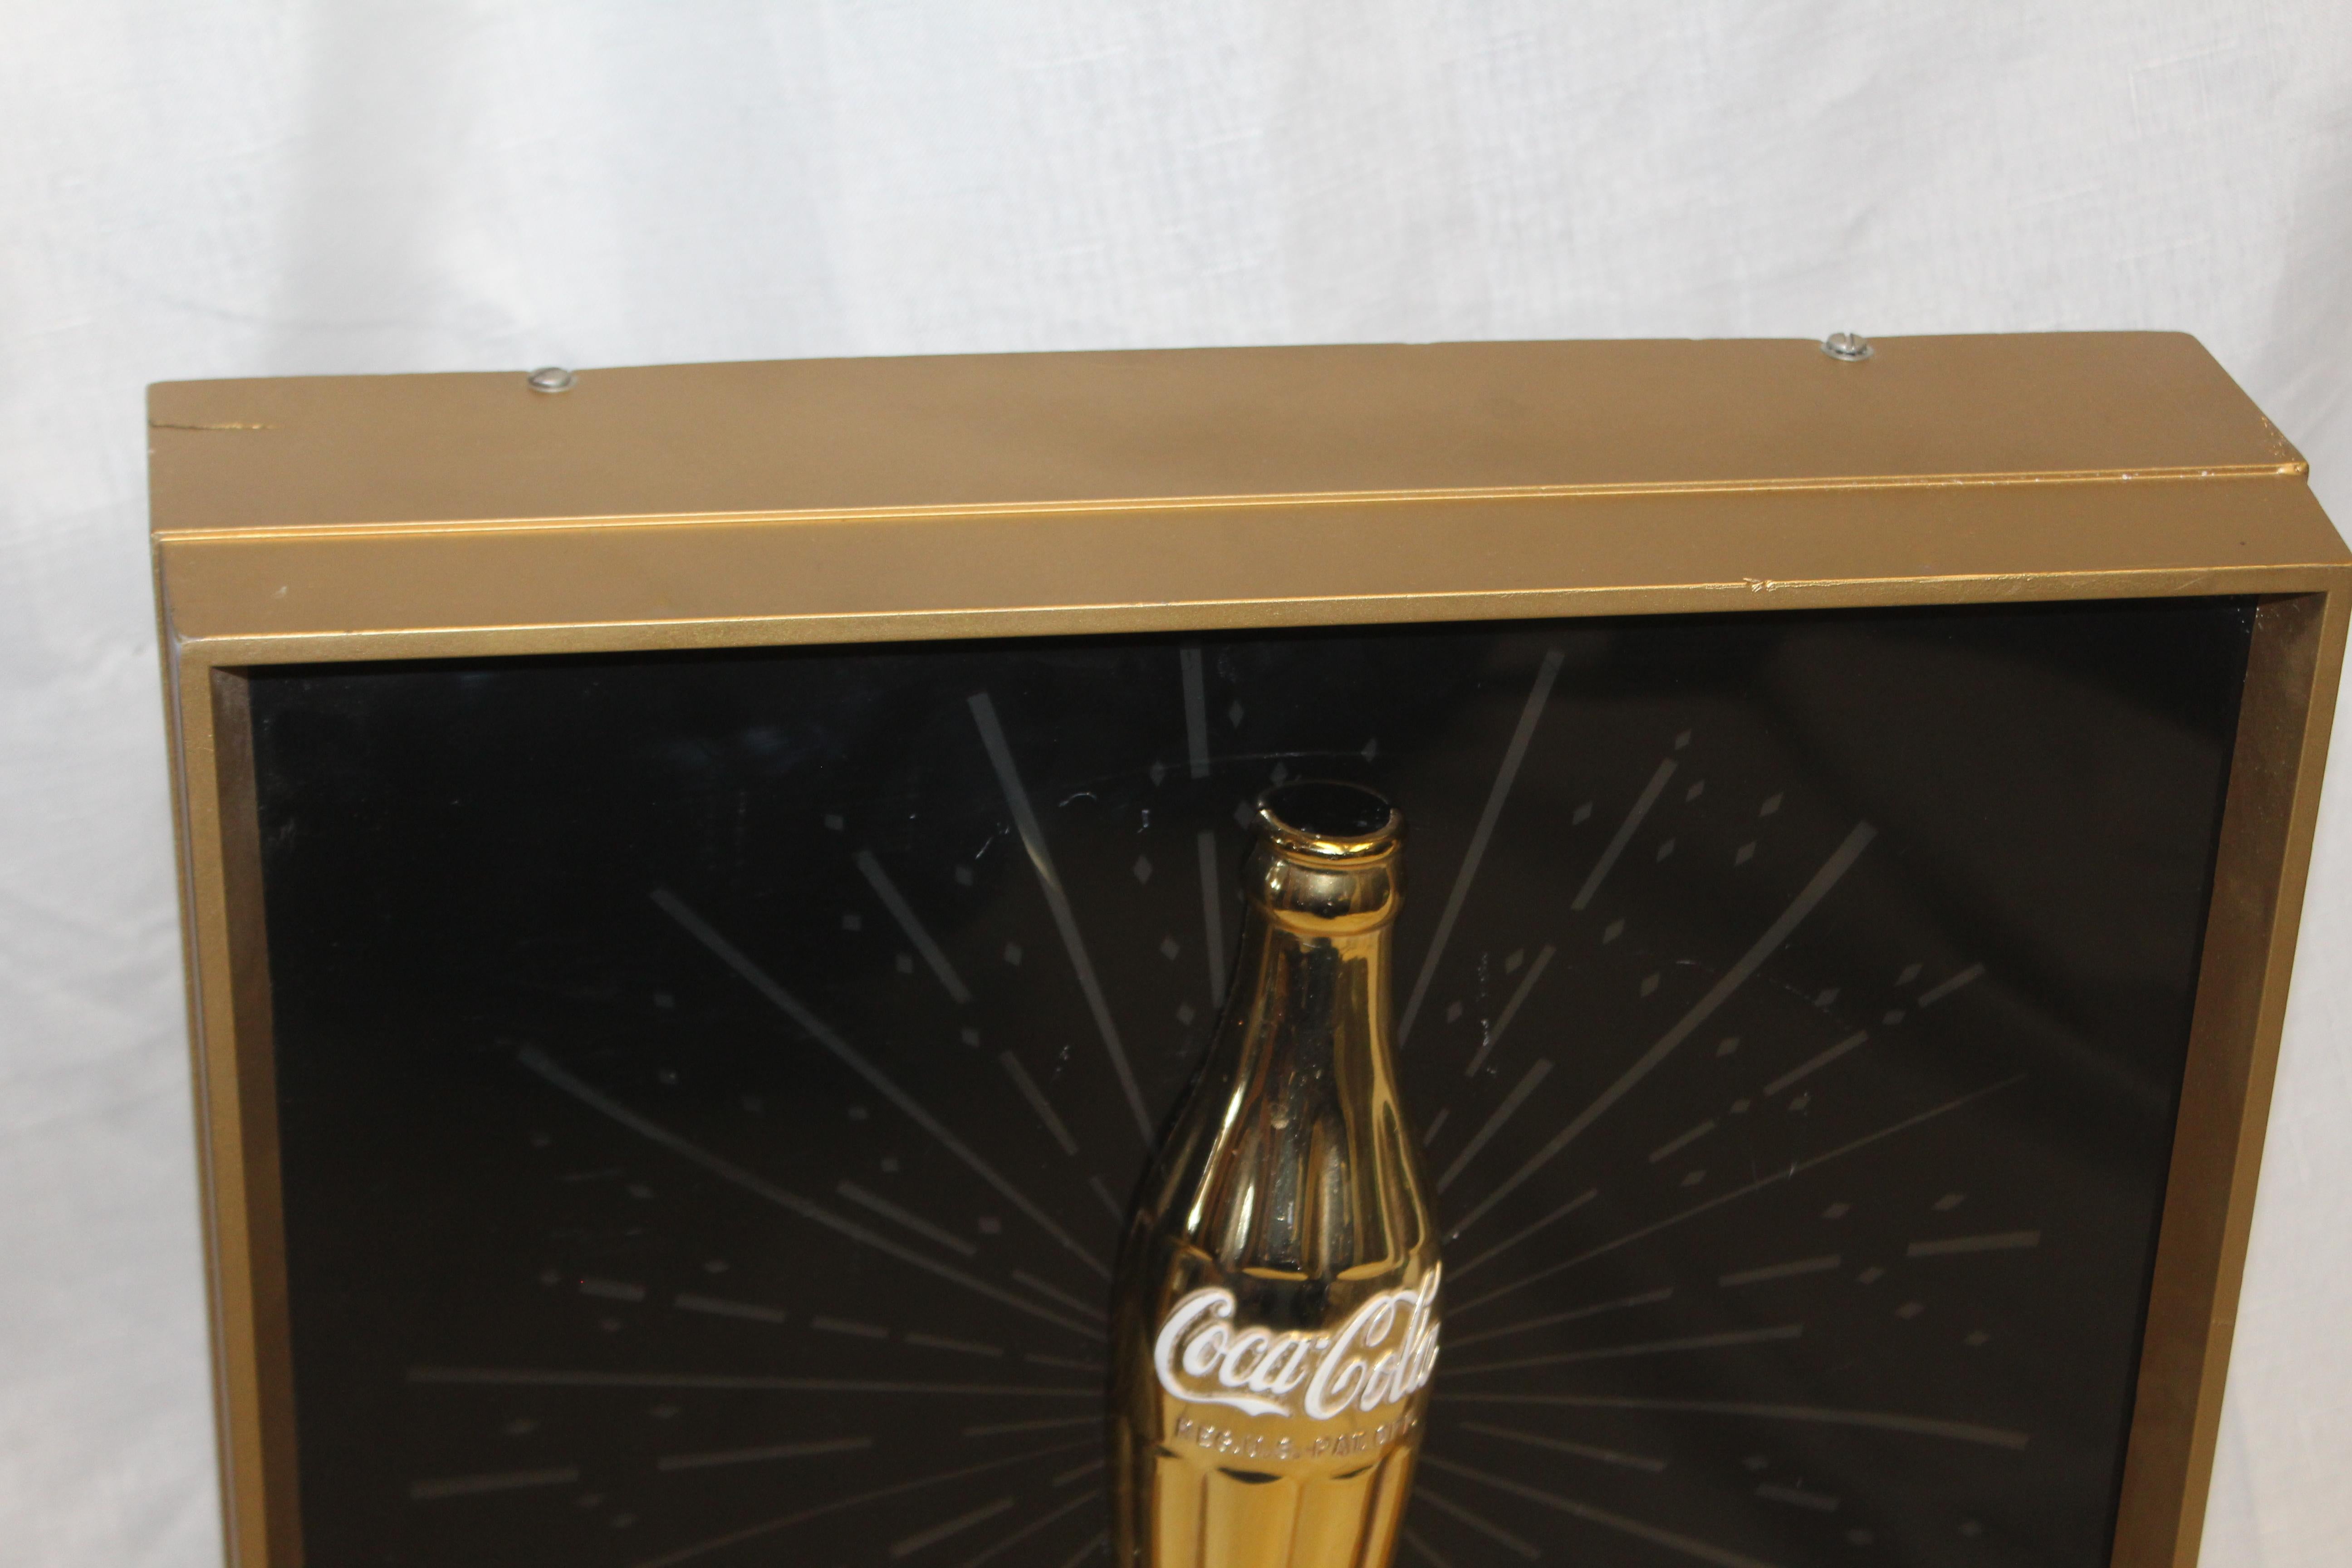 This 1960s light up advertising sign s 1 of 3 versions. This one has the gold bottle vs the glass or paper cup. This sign also has the great fishtail logo that also lights up.